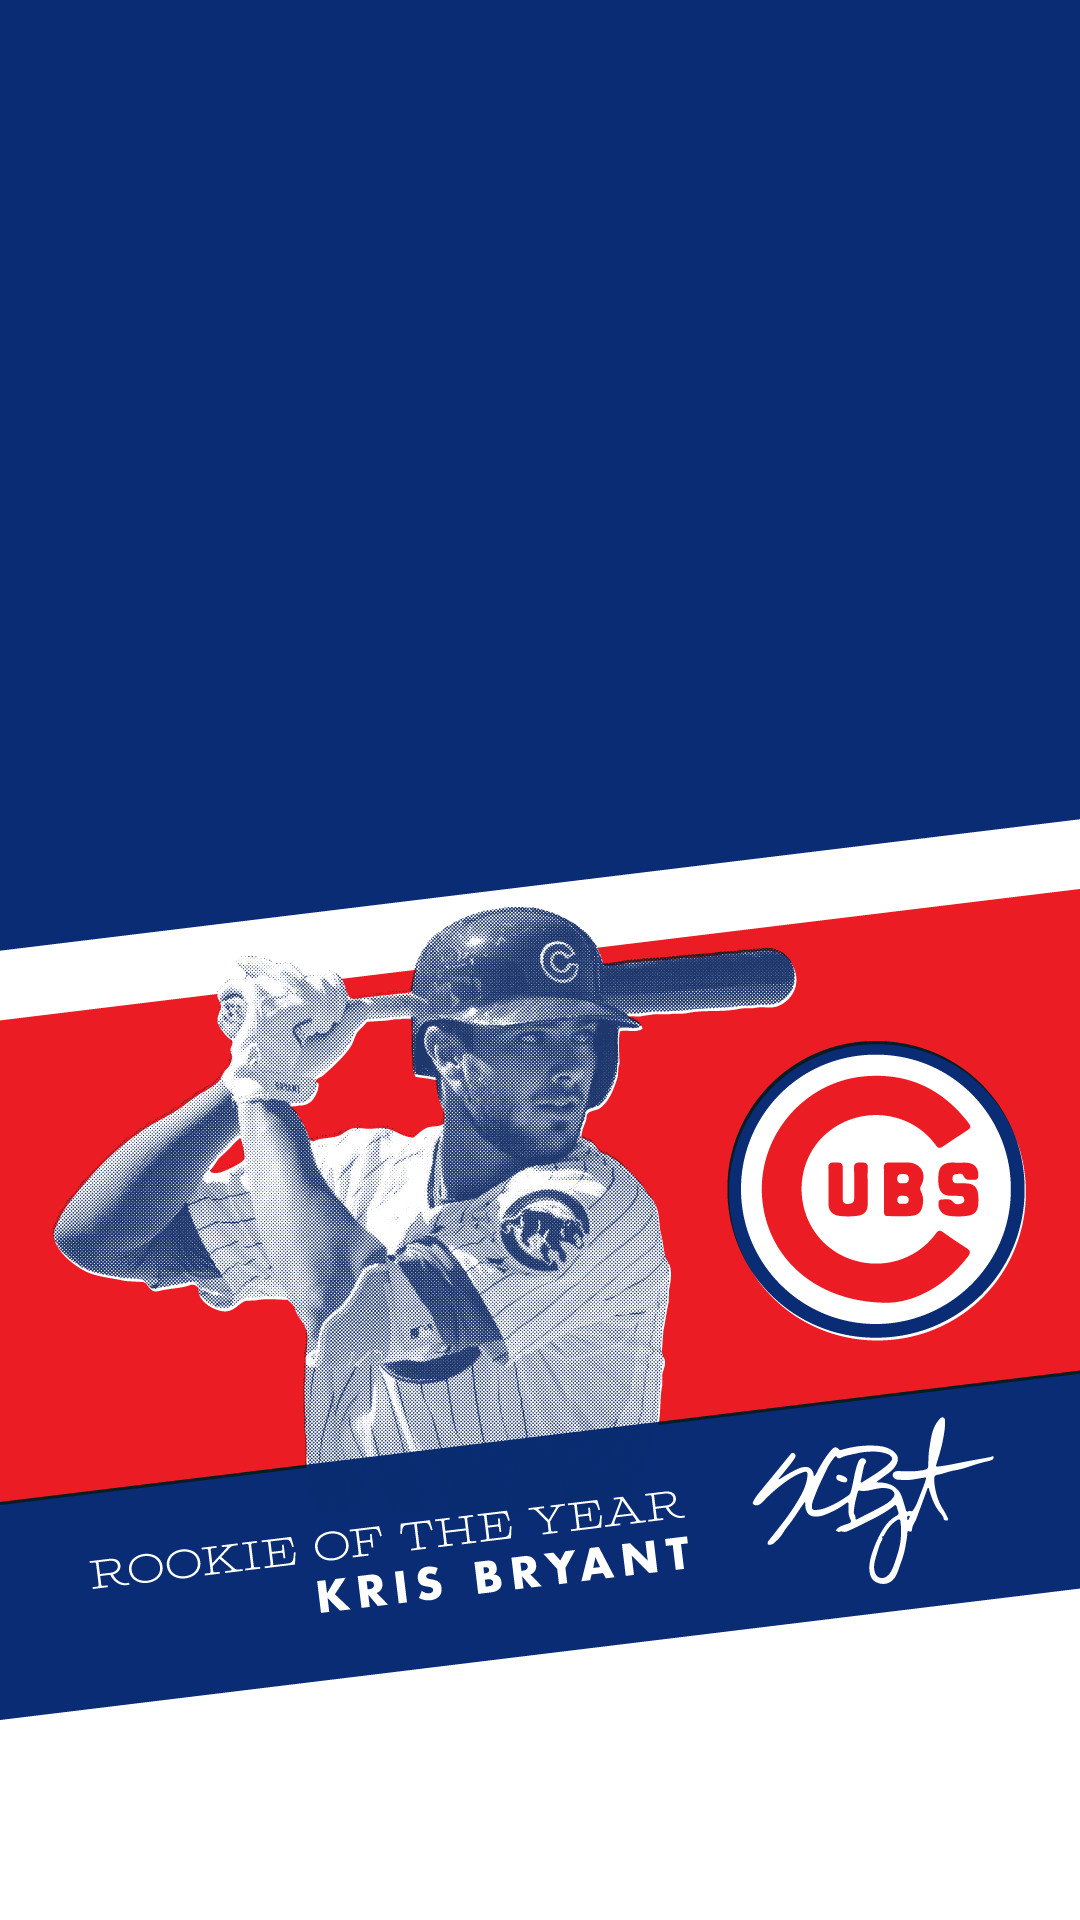 Kris Bryant Rookie of the Year,